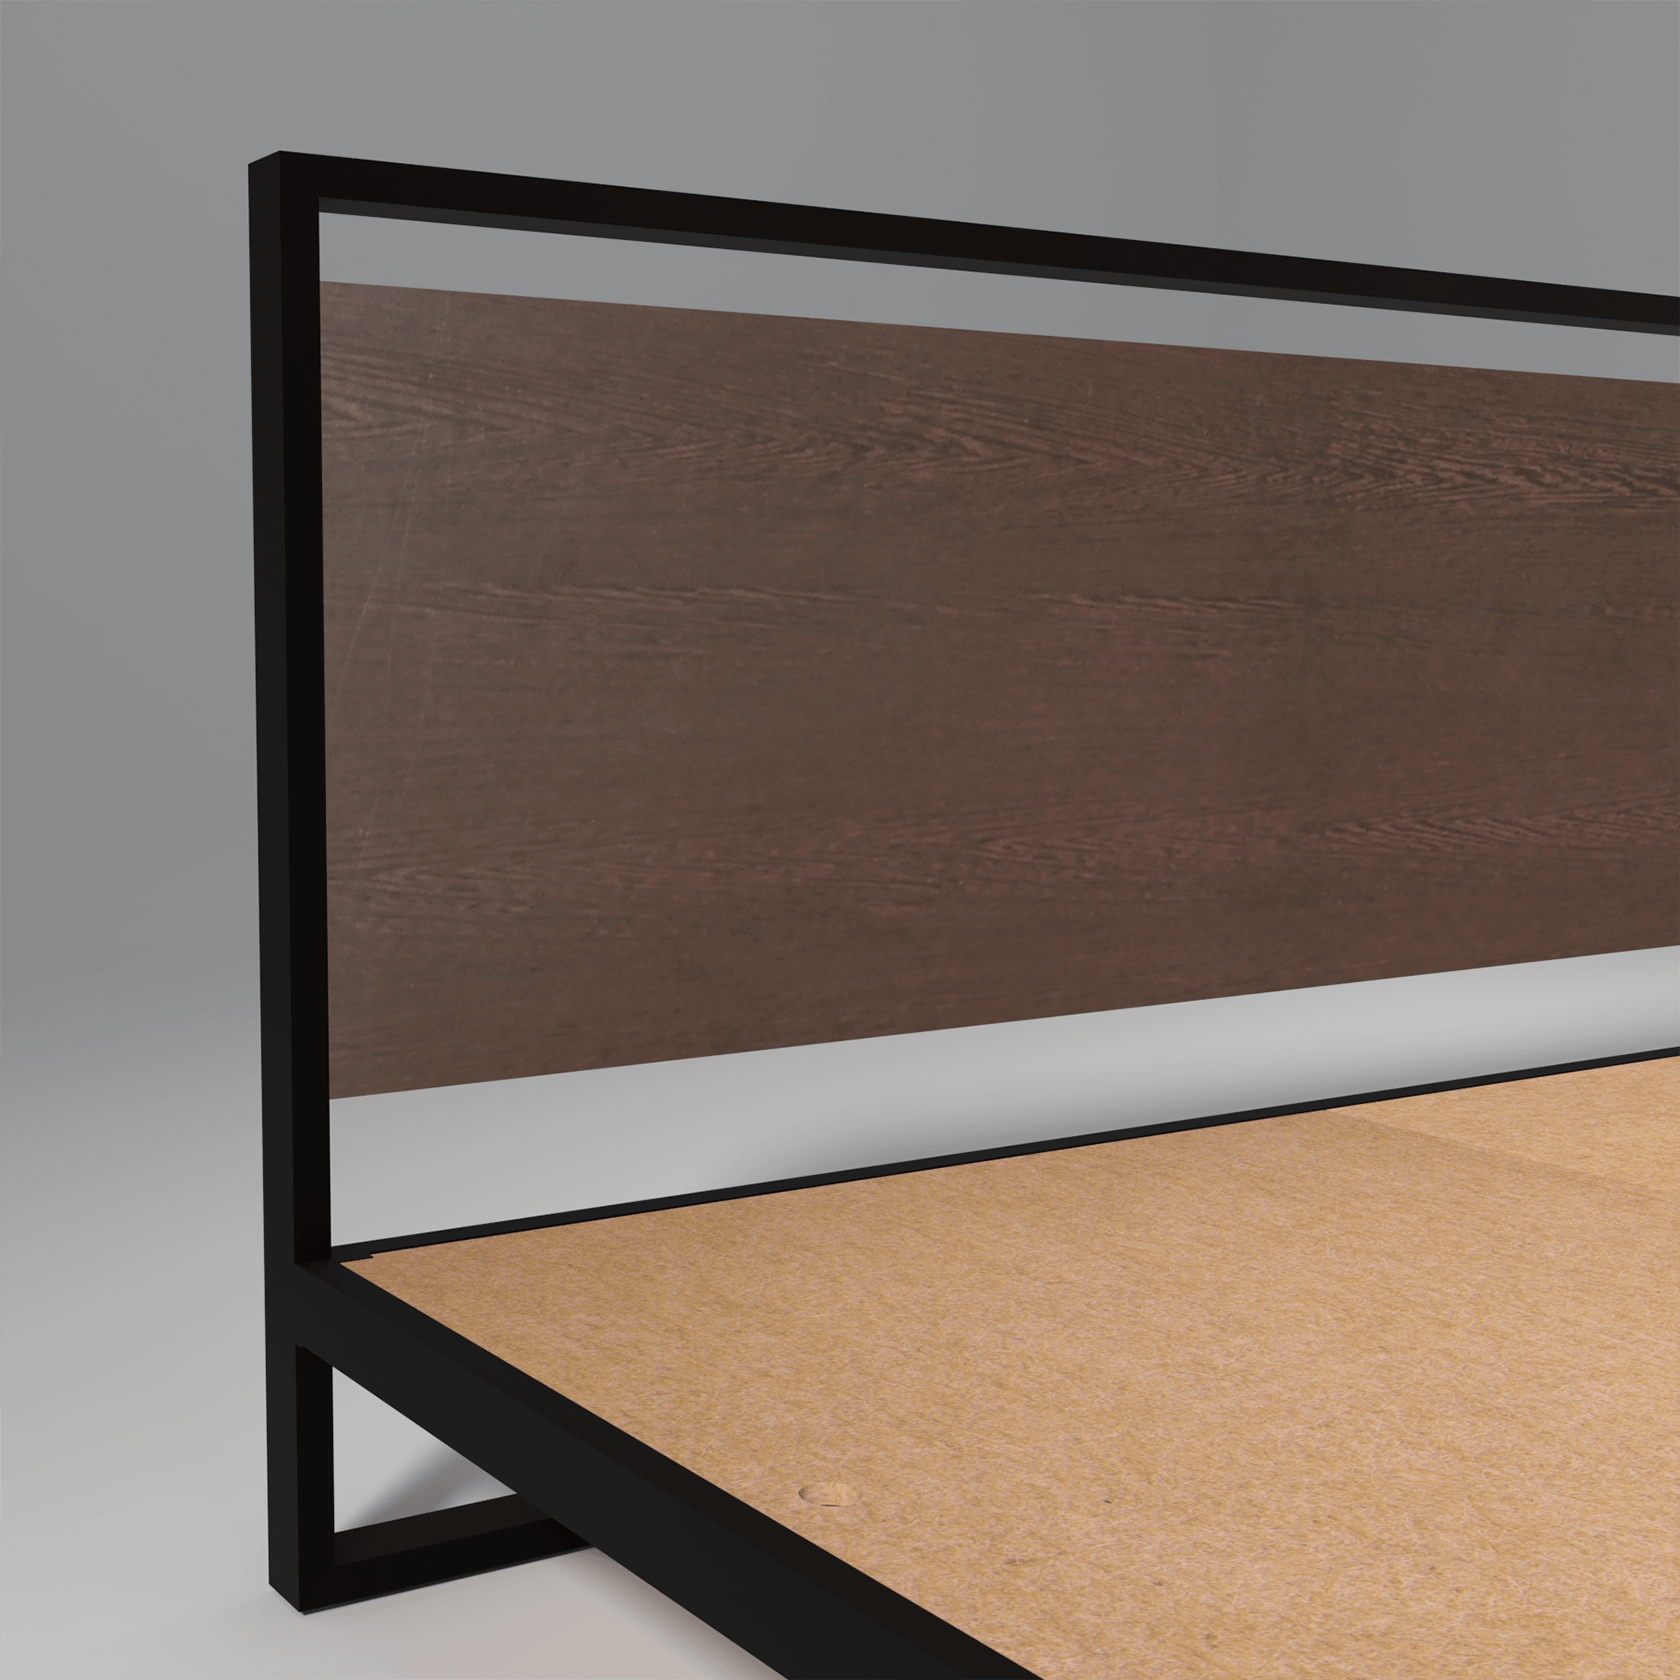 Indo Powder Coated Metal King Size Bed With MDF Wood